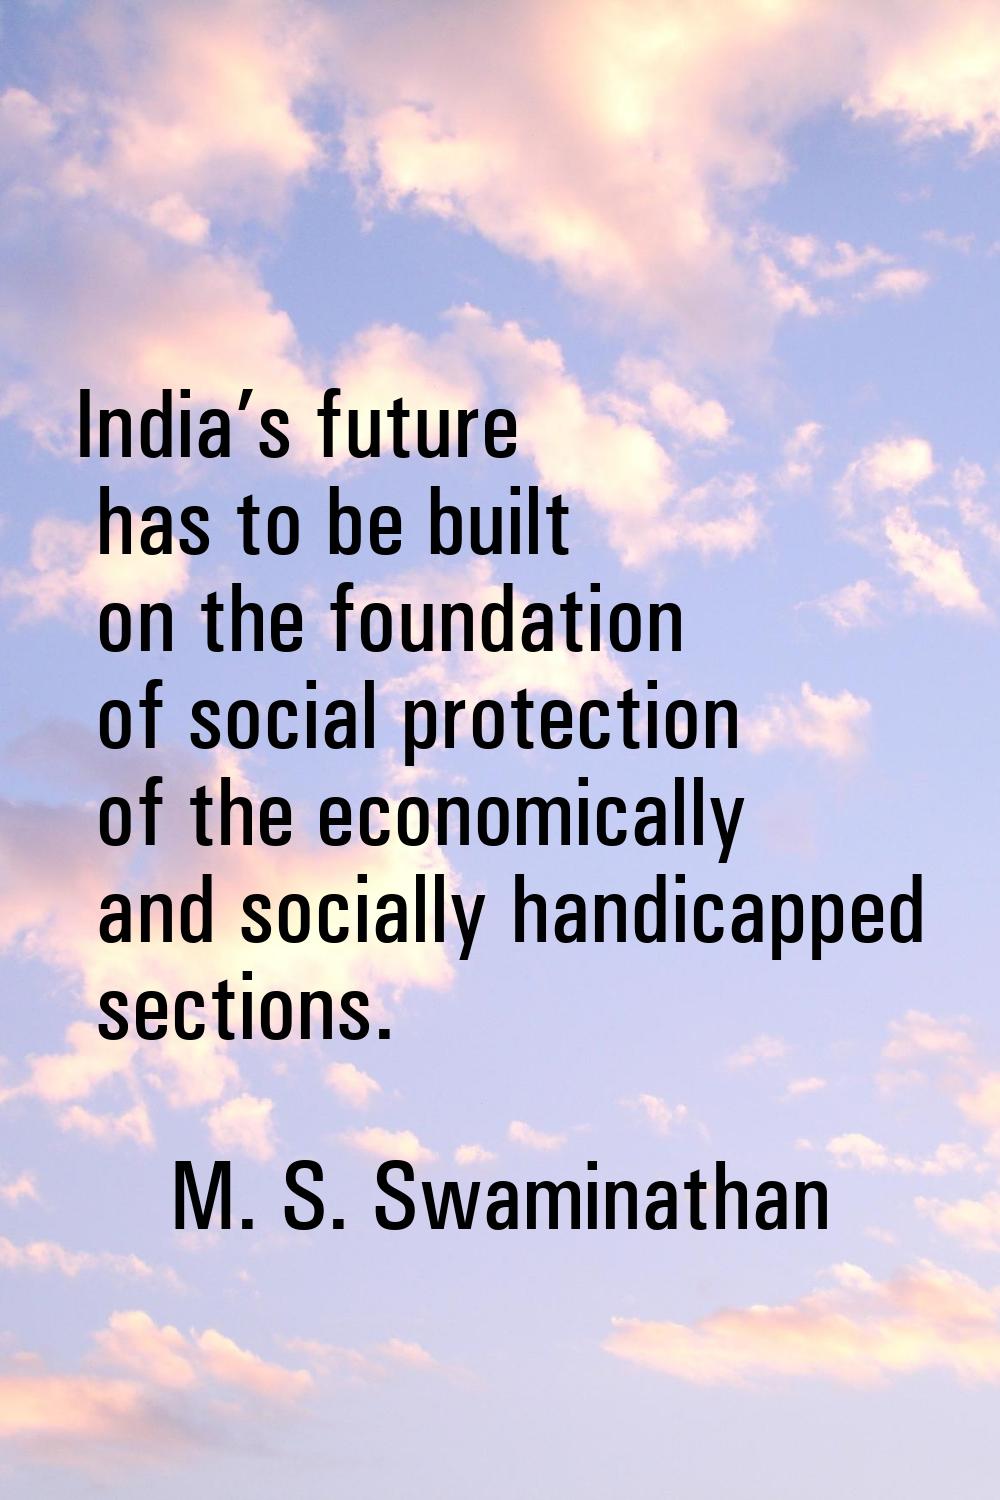 India’s future has to be built on the foundation of social protection of the economically and socia